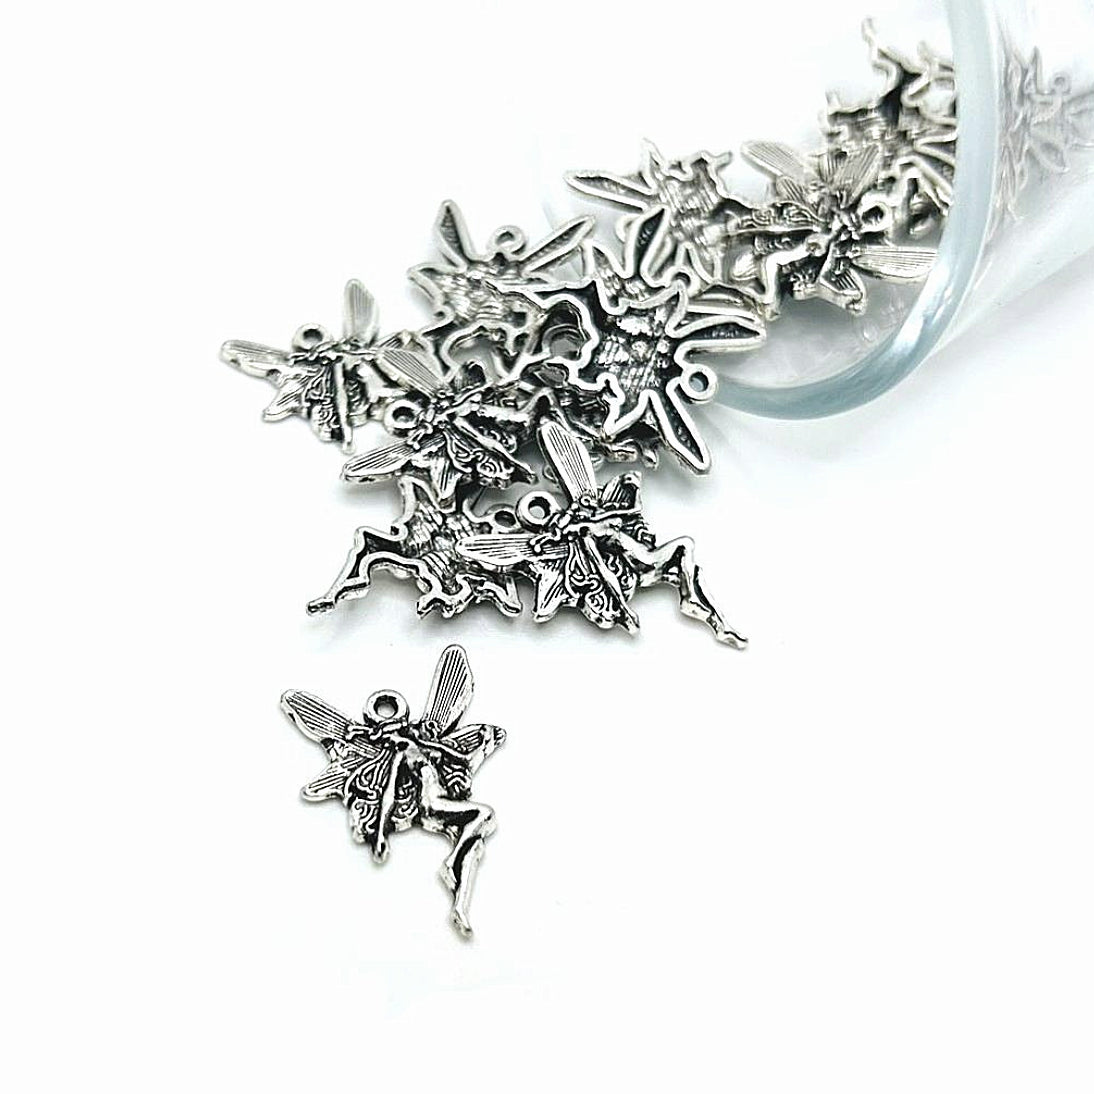 4, 20 or 50 Pieces: Silver Fairy Sprite Charms